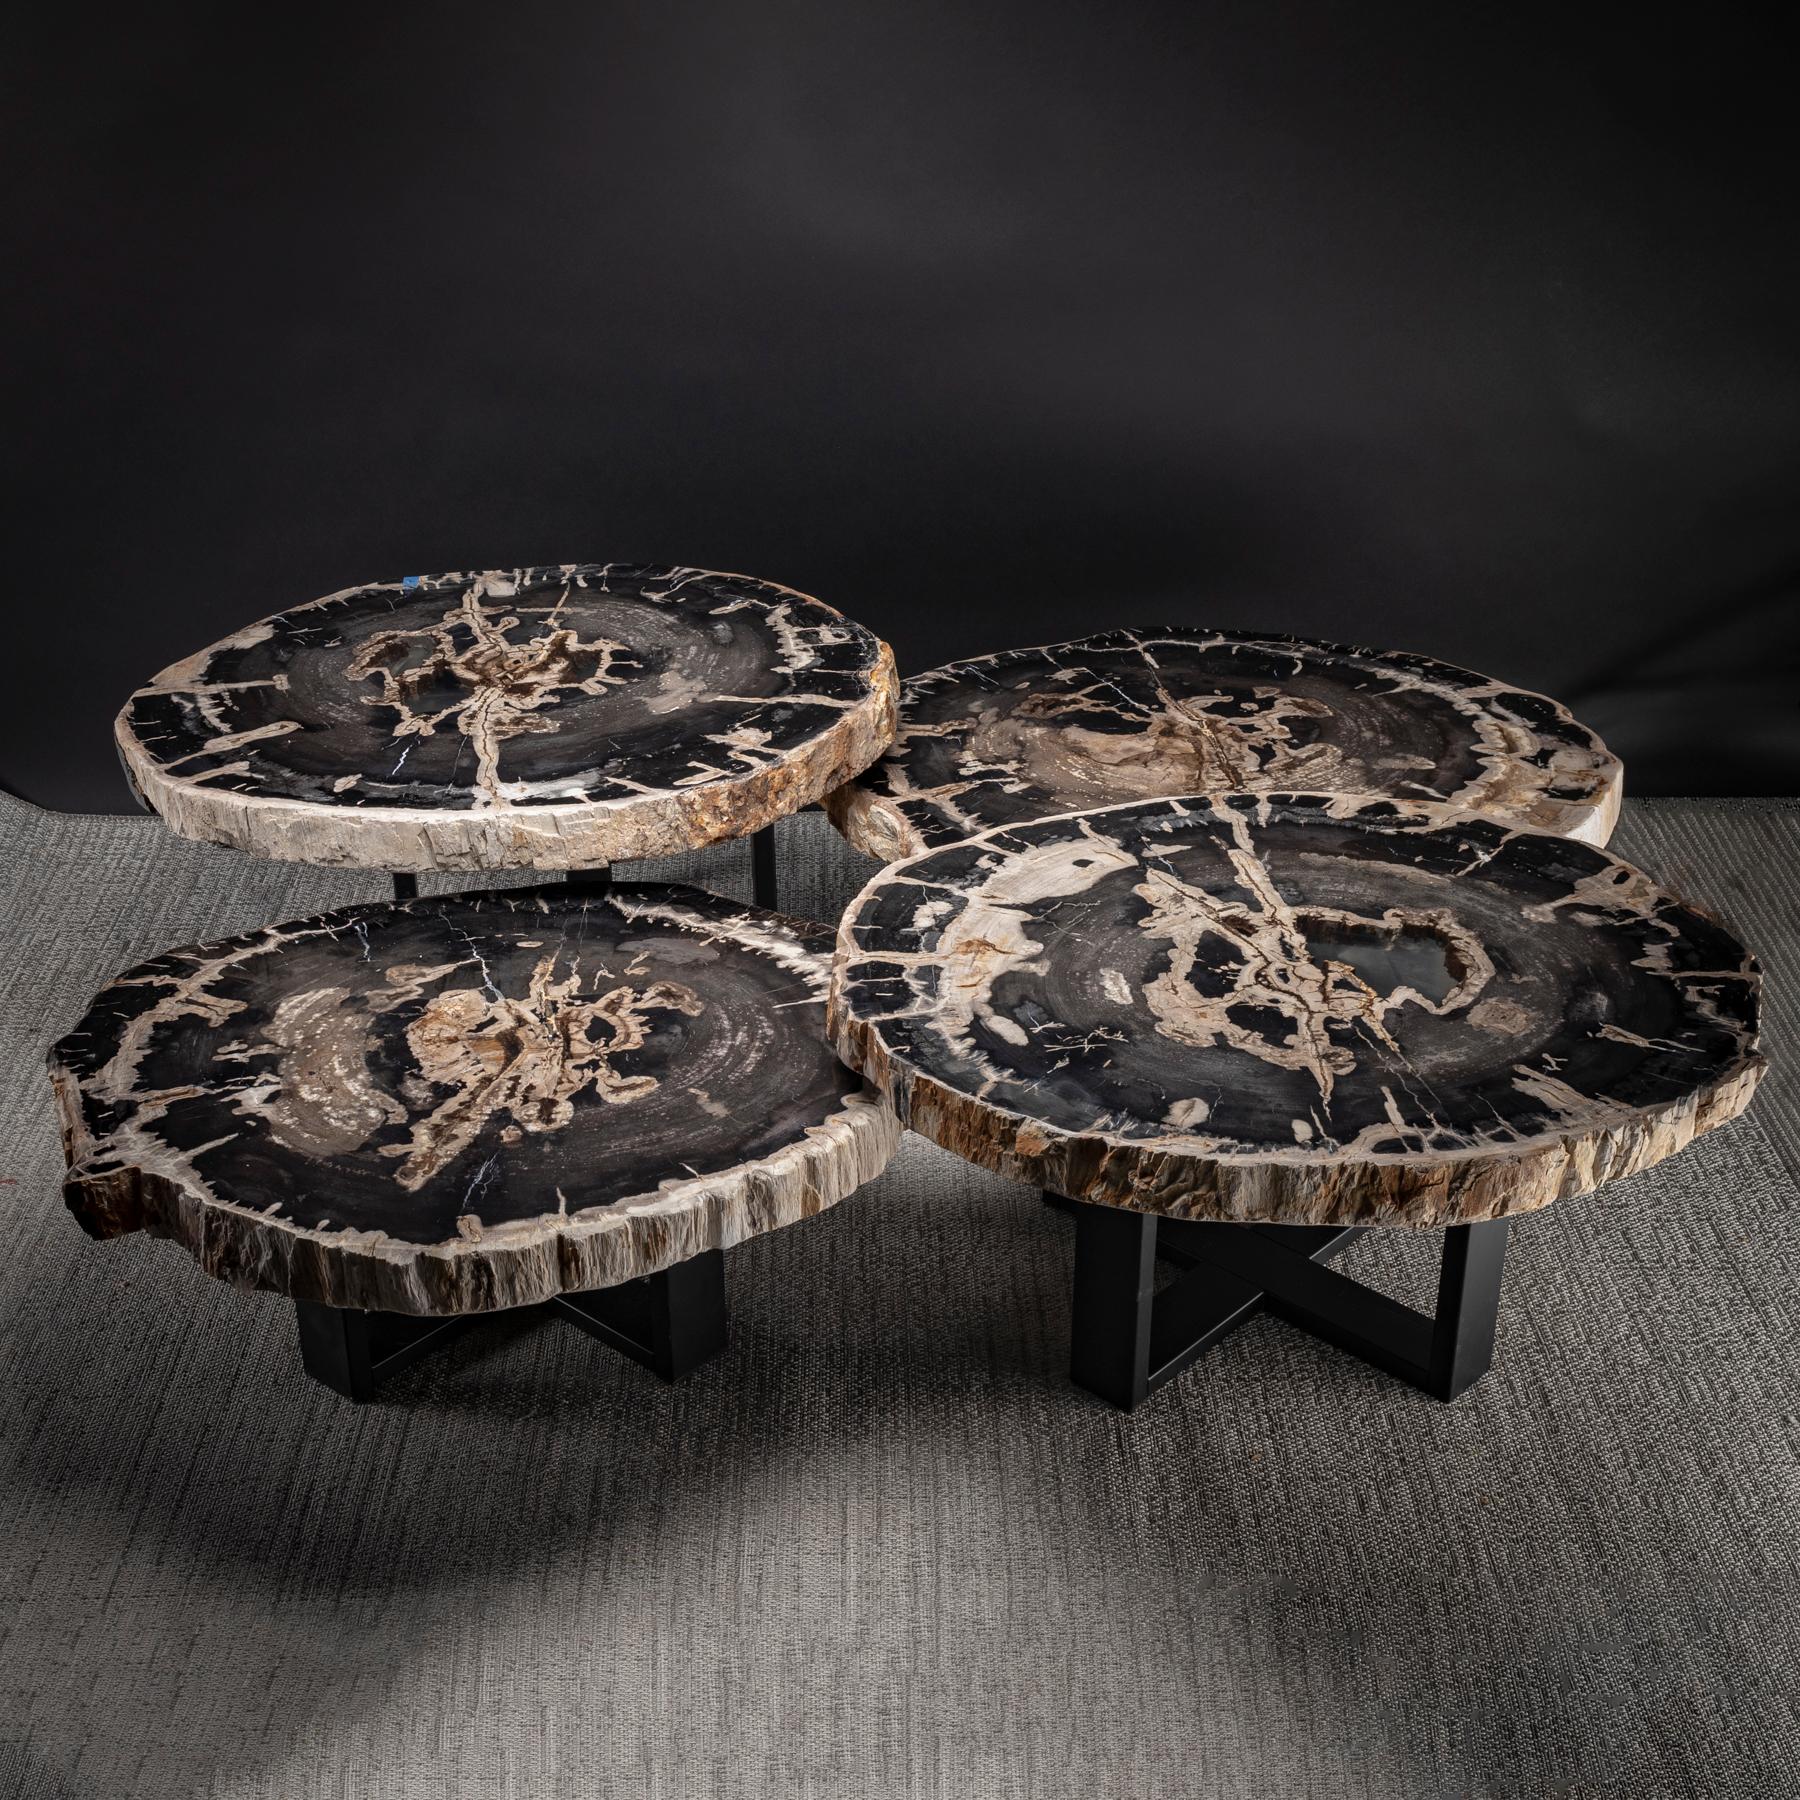 Organic Modern Center Table, Four-Piece Petrified Wood Table with Metal Base